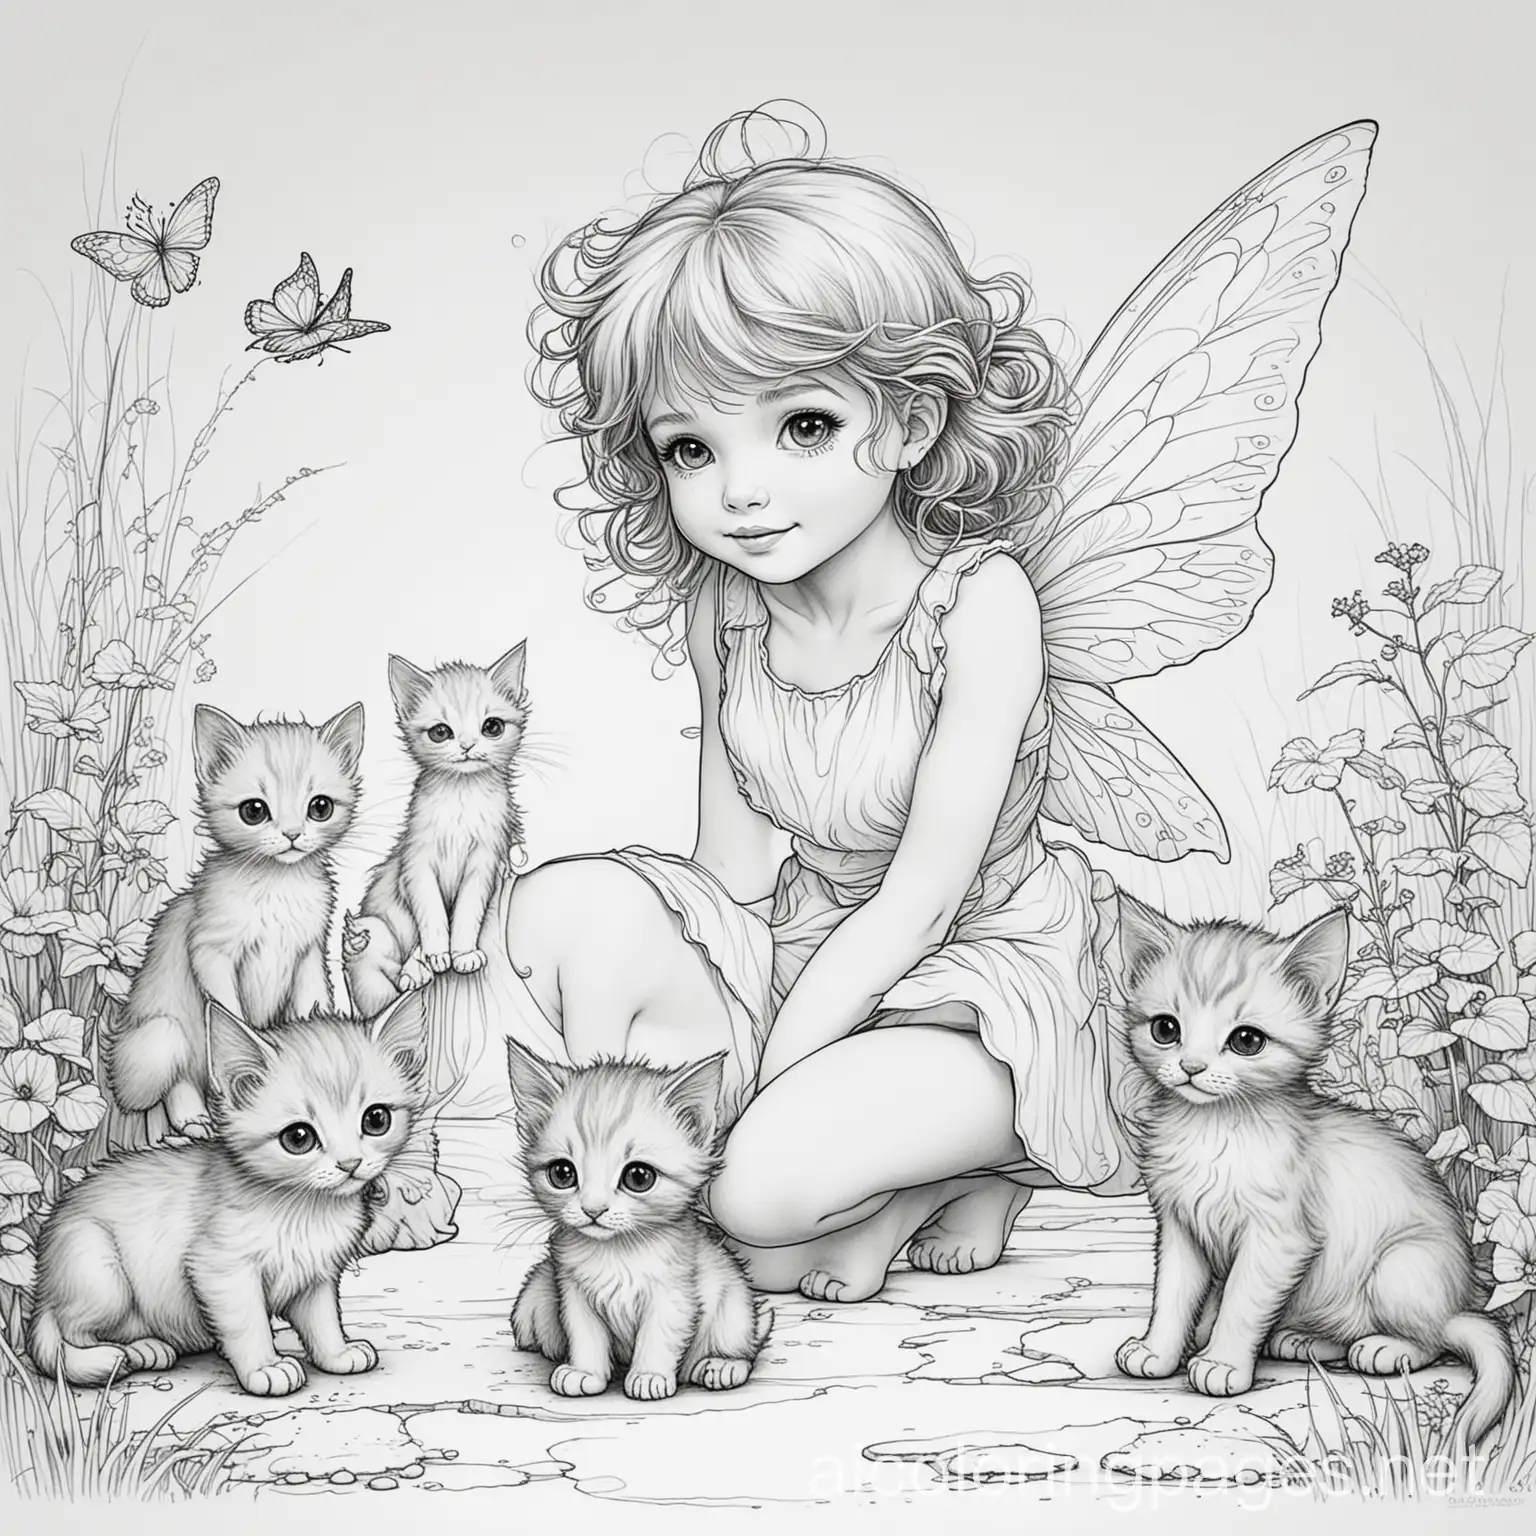 Adorable-Fairy-Girl-Playing-with-Kittens-Coloring-Page